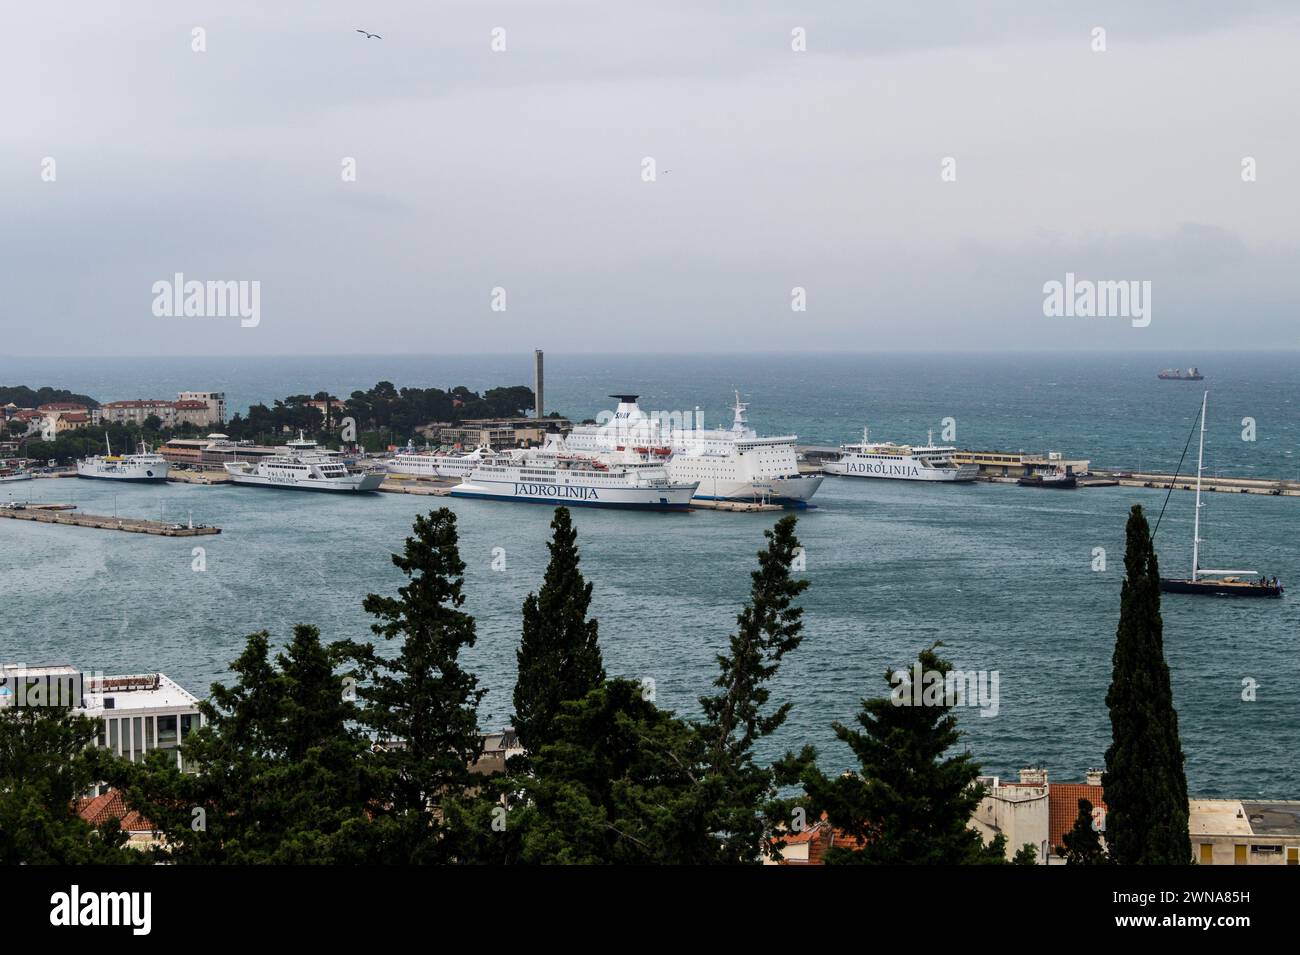 Large Jadrolinija ferry docked  under a cloudy sky, with other ships in the background, Split, Croatia, seen from Marjan Hill Stock Photo